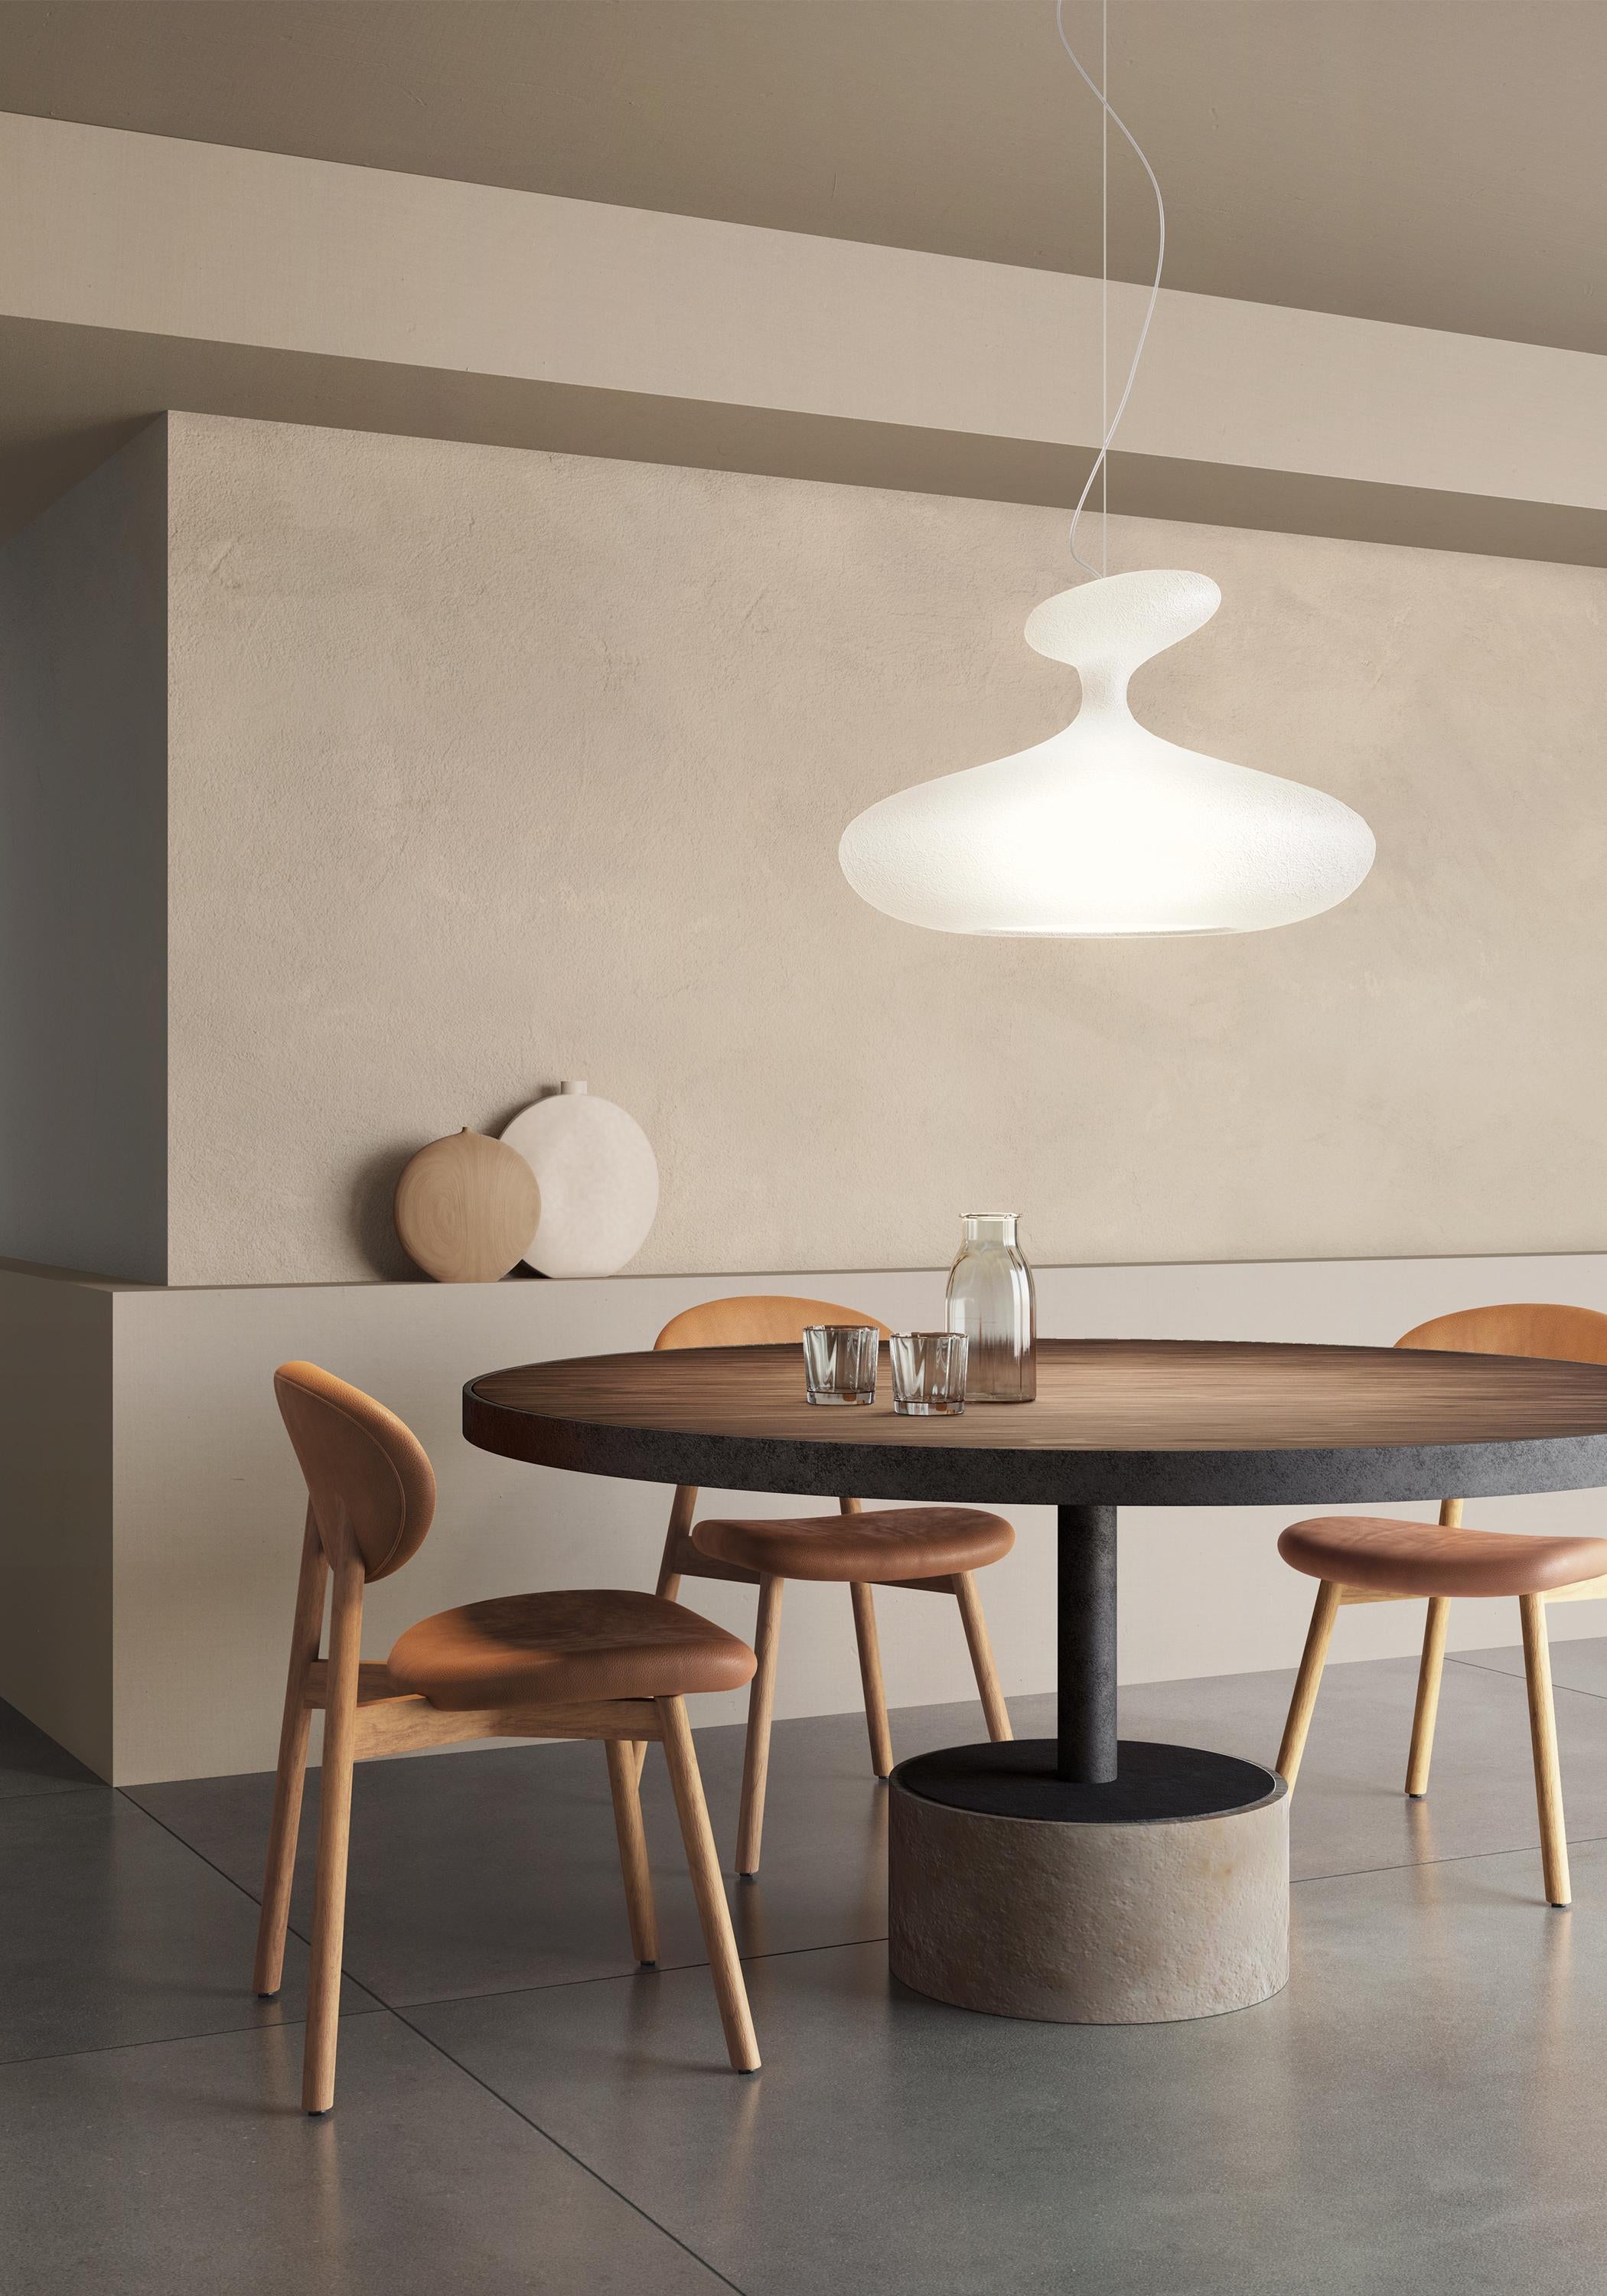 E.T.A. sat orange finish

The material is transformed and turned into a light. Physical presence and abstract concept for a light with an original aesthetic look. Fluid, irregular shapes create an innovative, eye-catching equilibrium. A highly